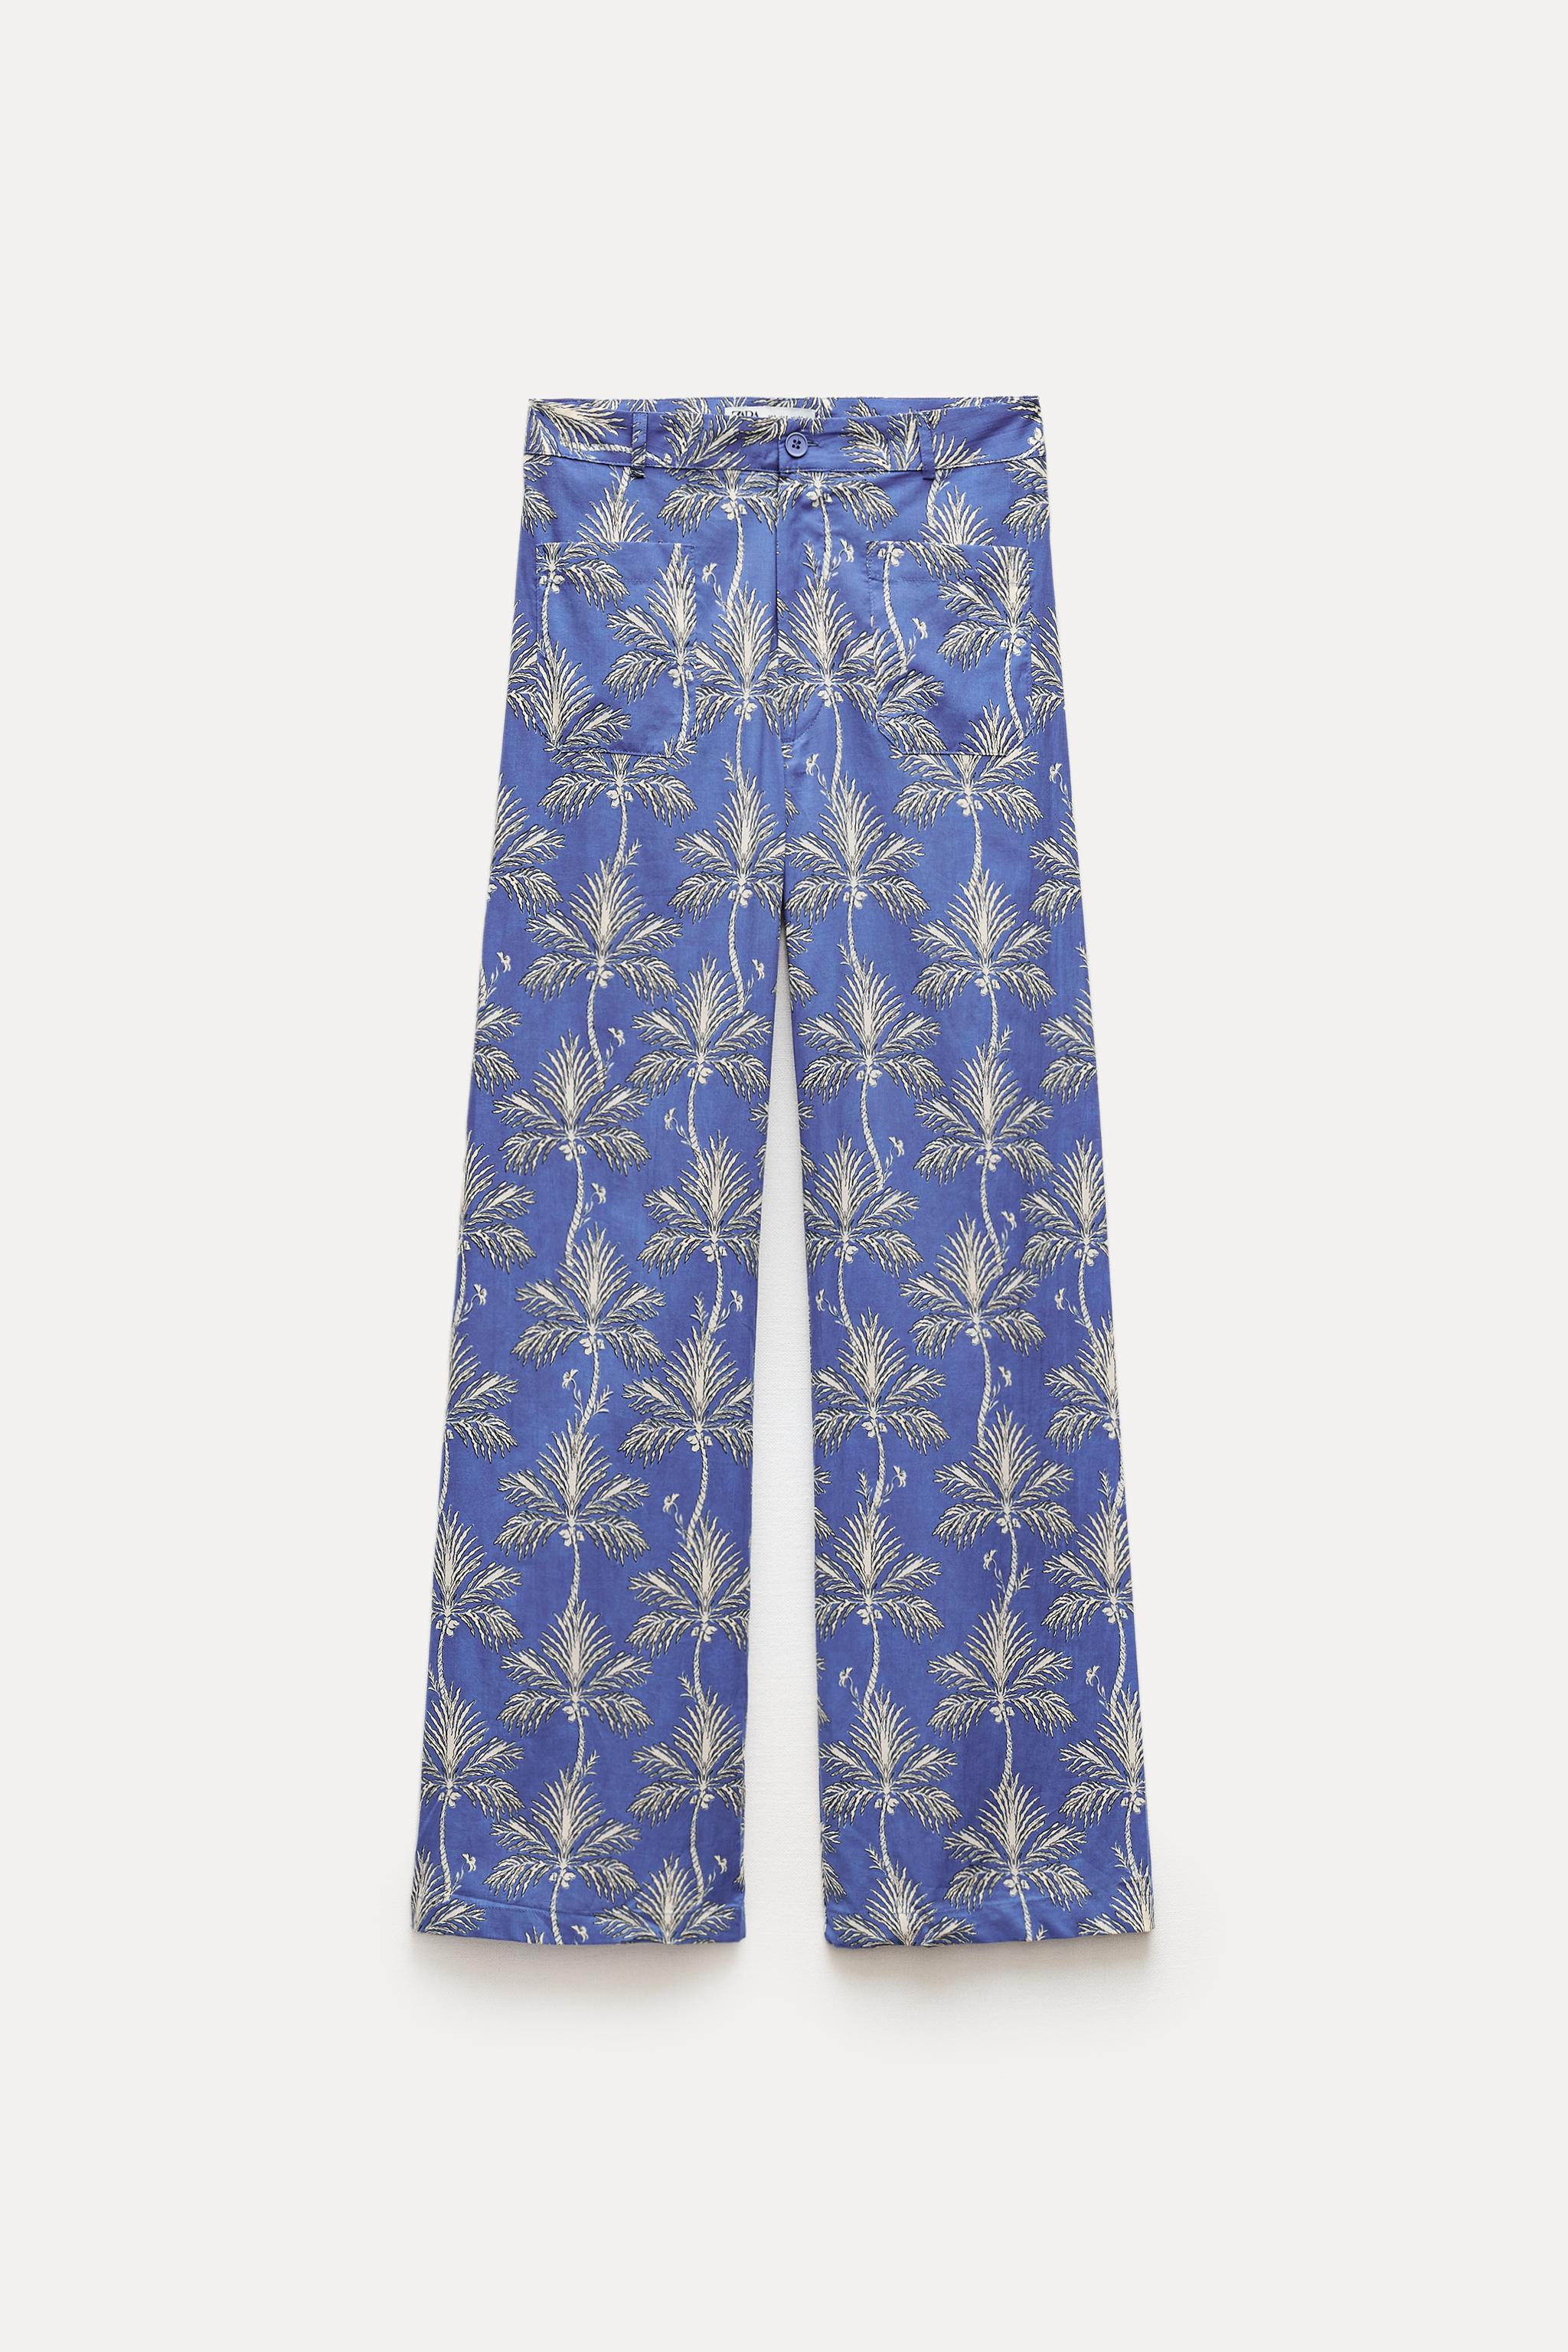 ZW COLLECTION PRINTED PANTS